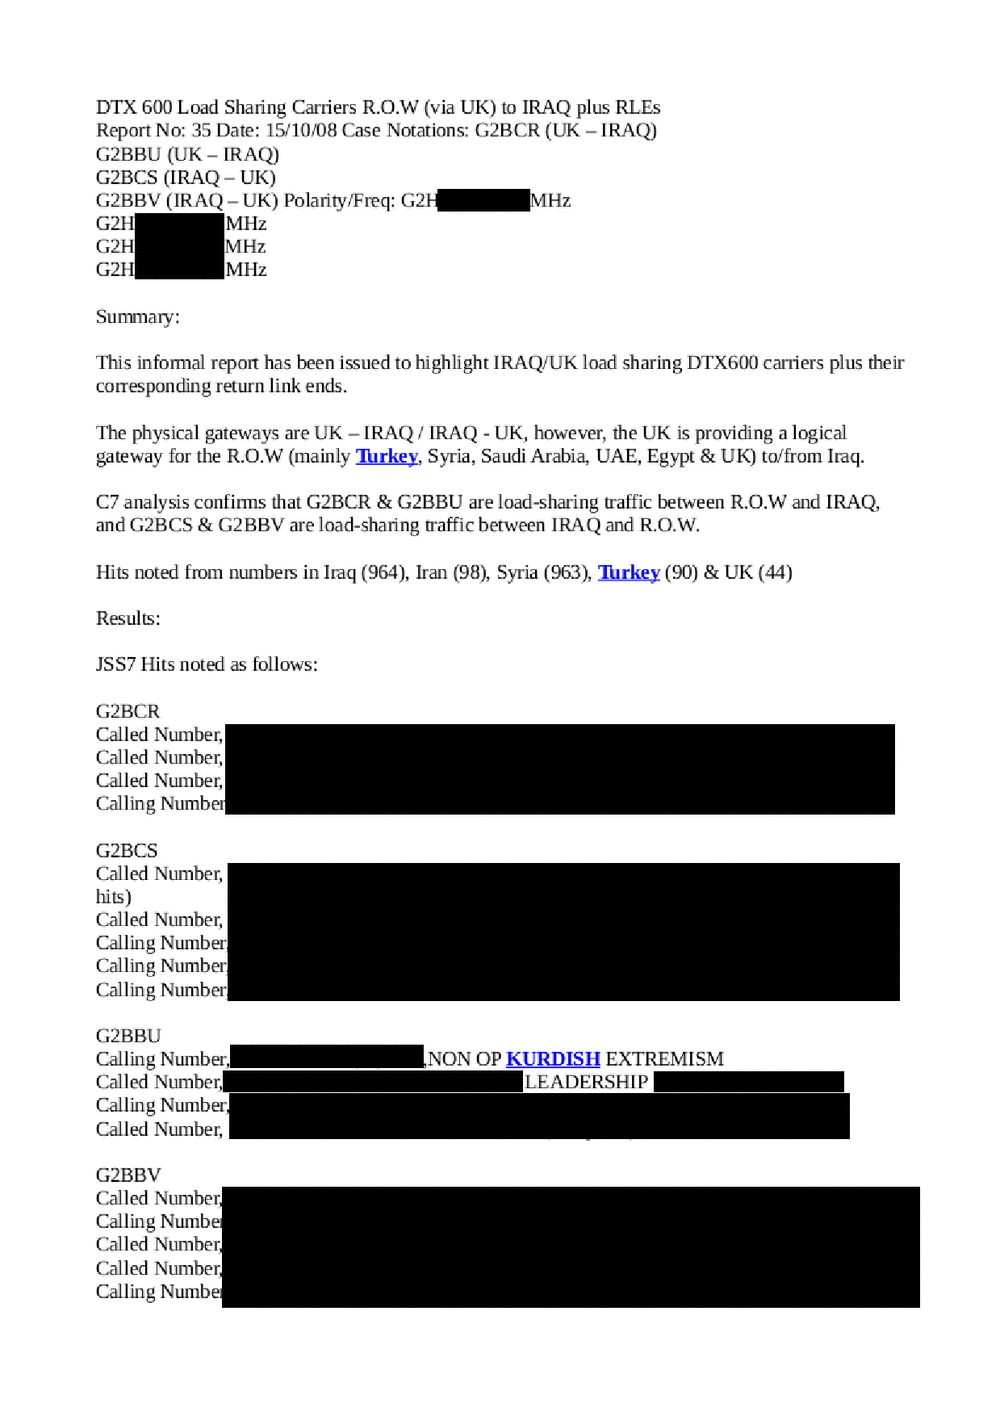 Page 1 from GCHQ Surveillance Summary